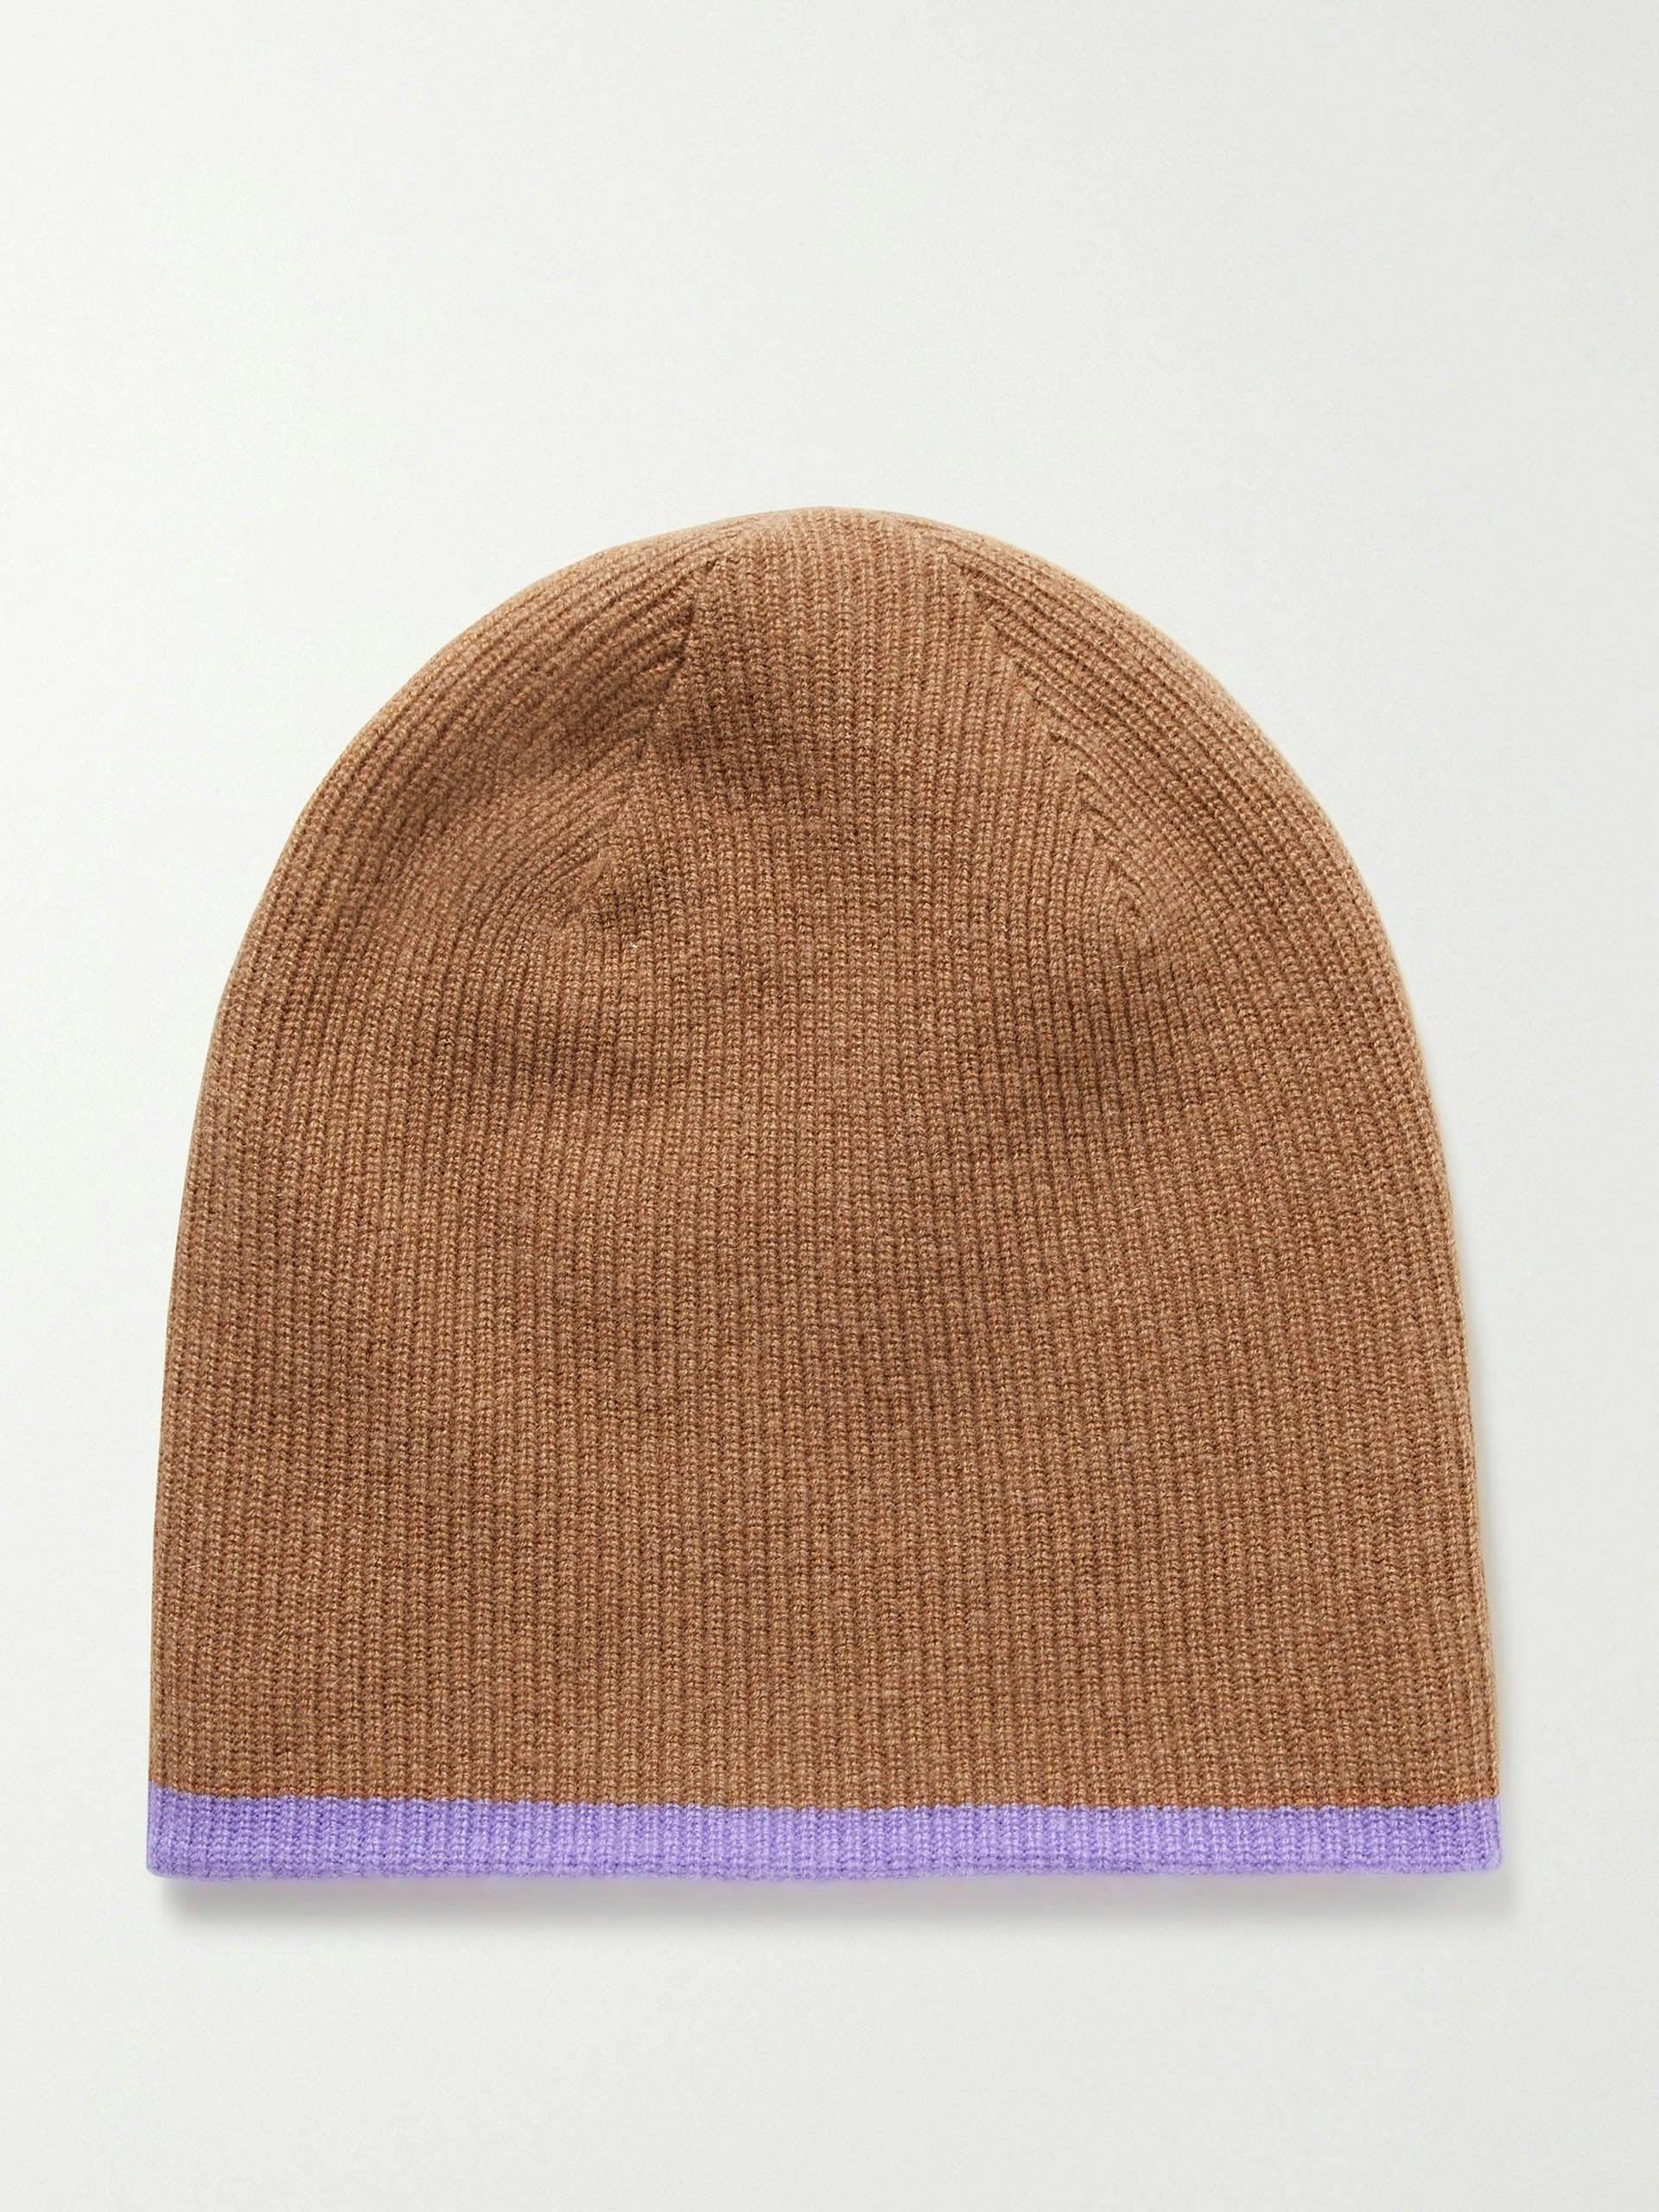 Reversible two-tone hat